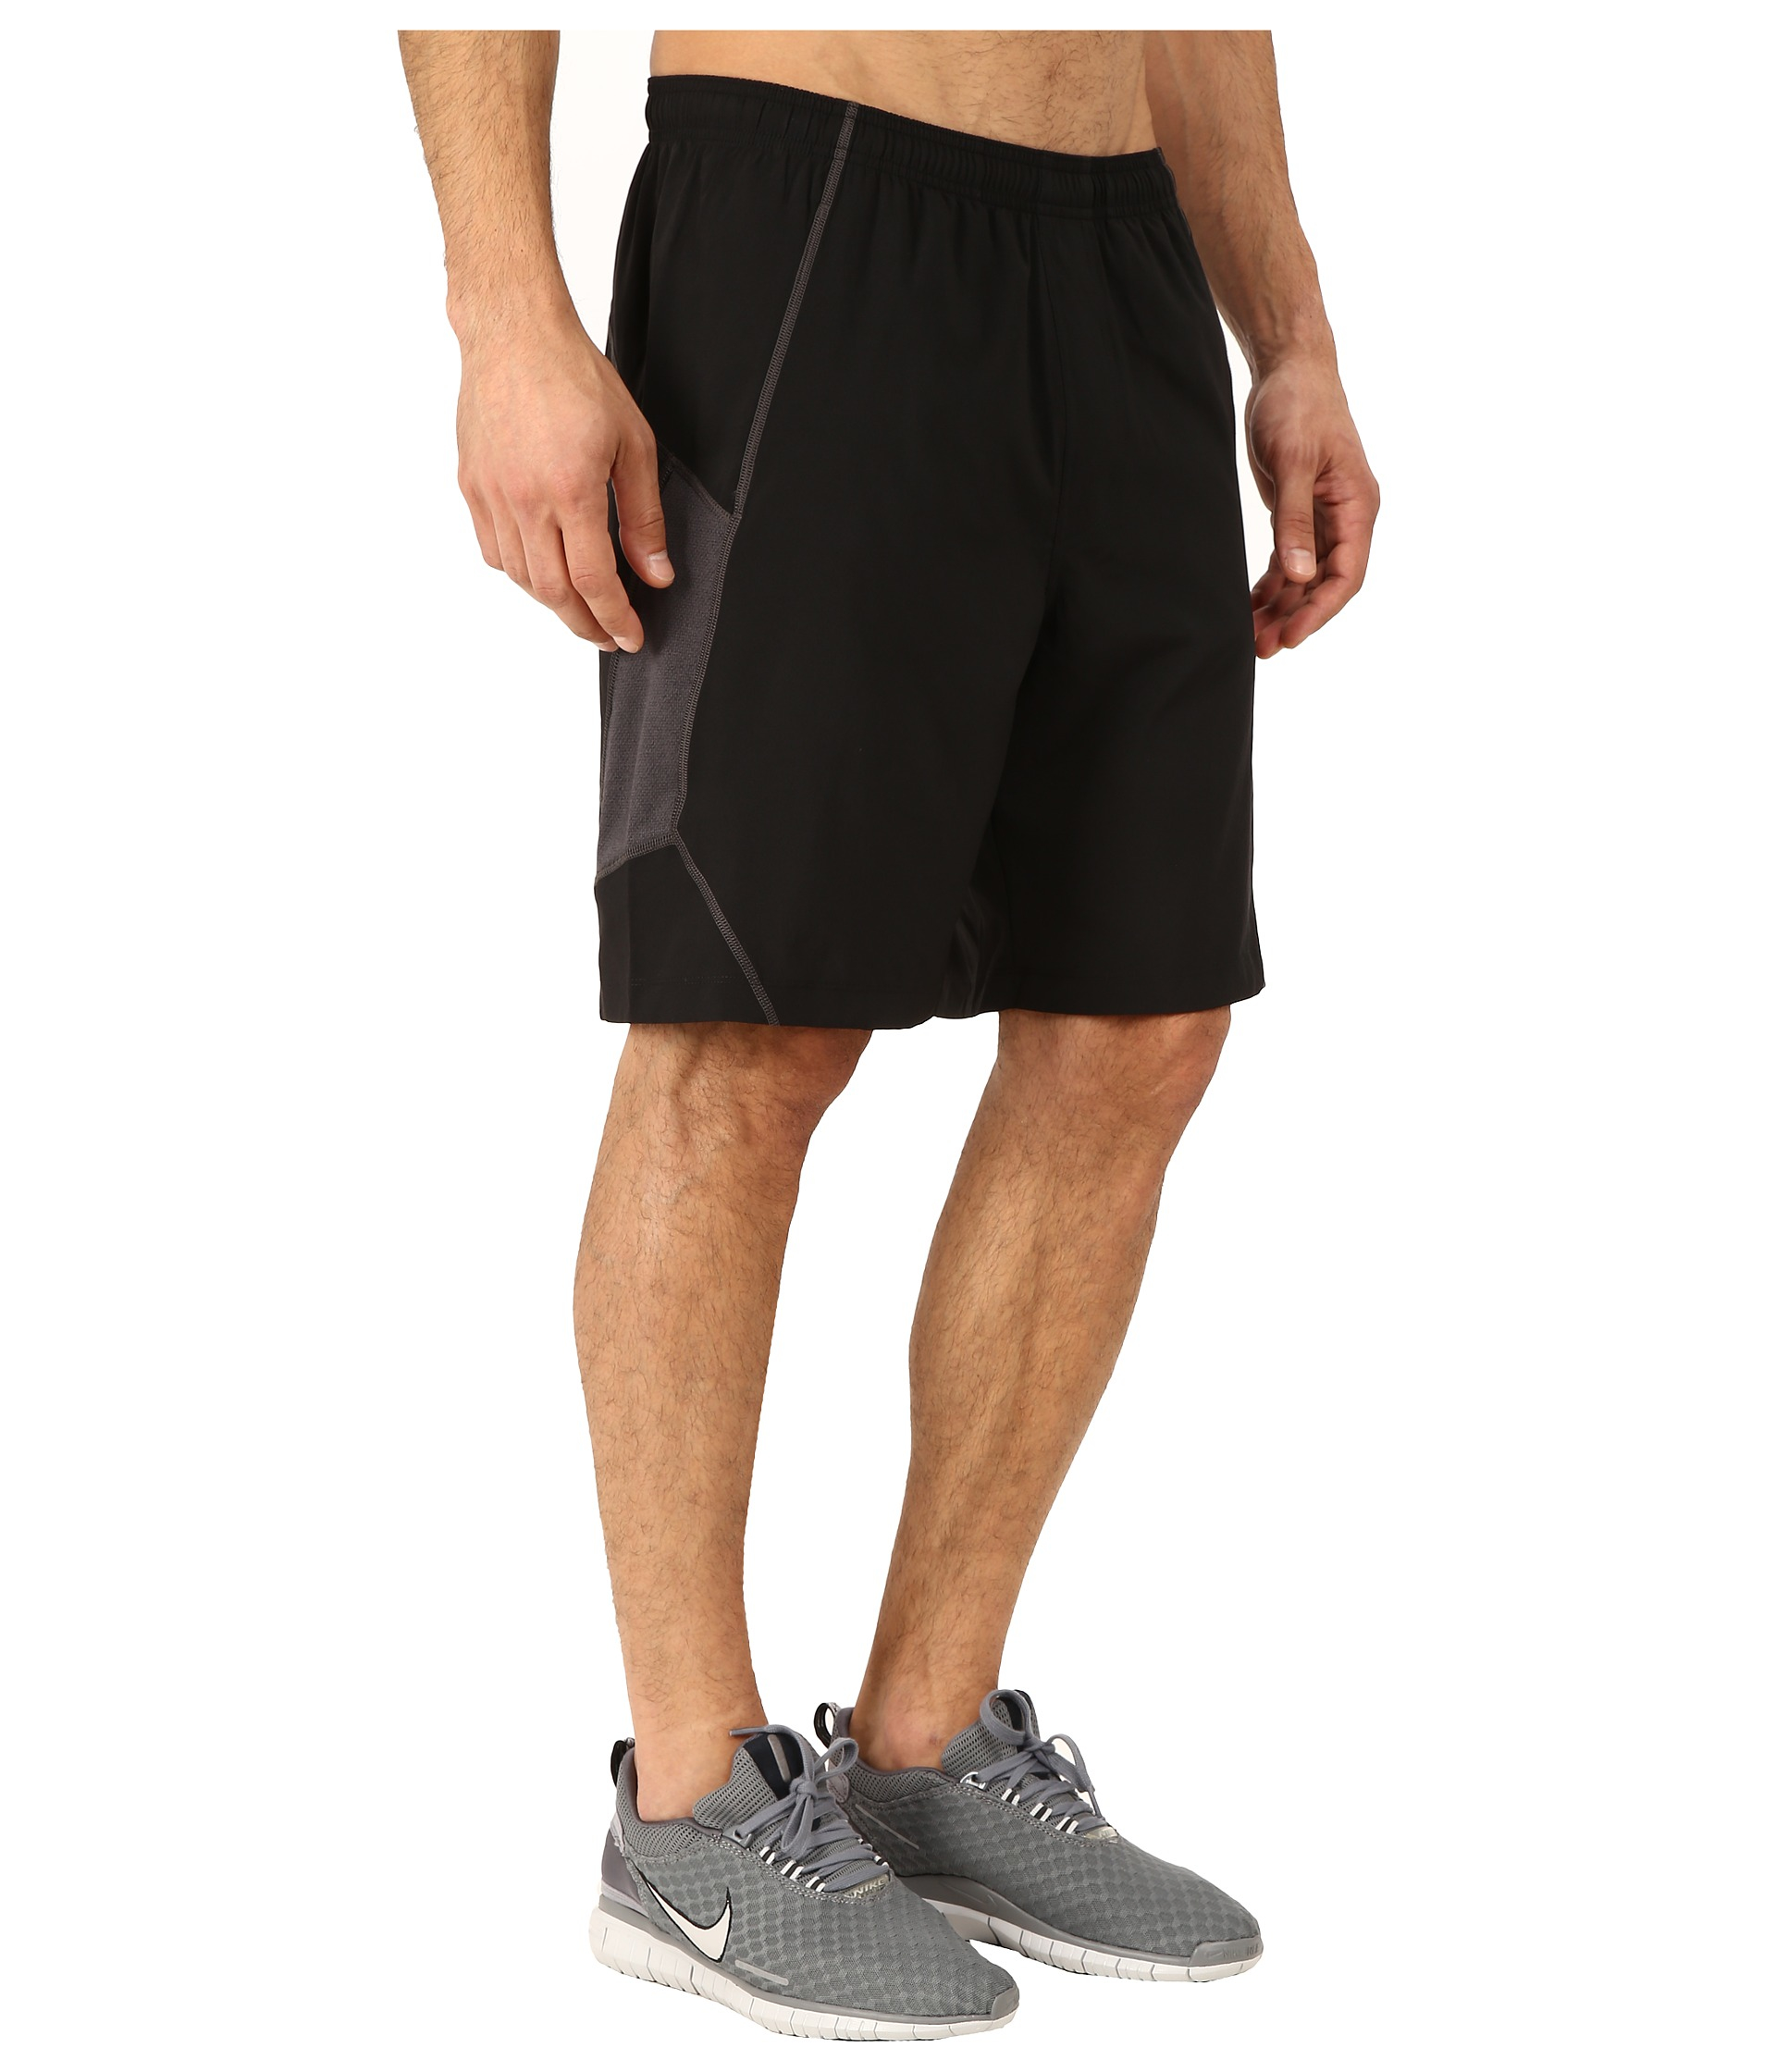 Lyst - The north face Voltage Shorts in Black for Men